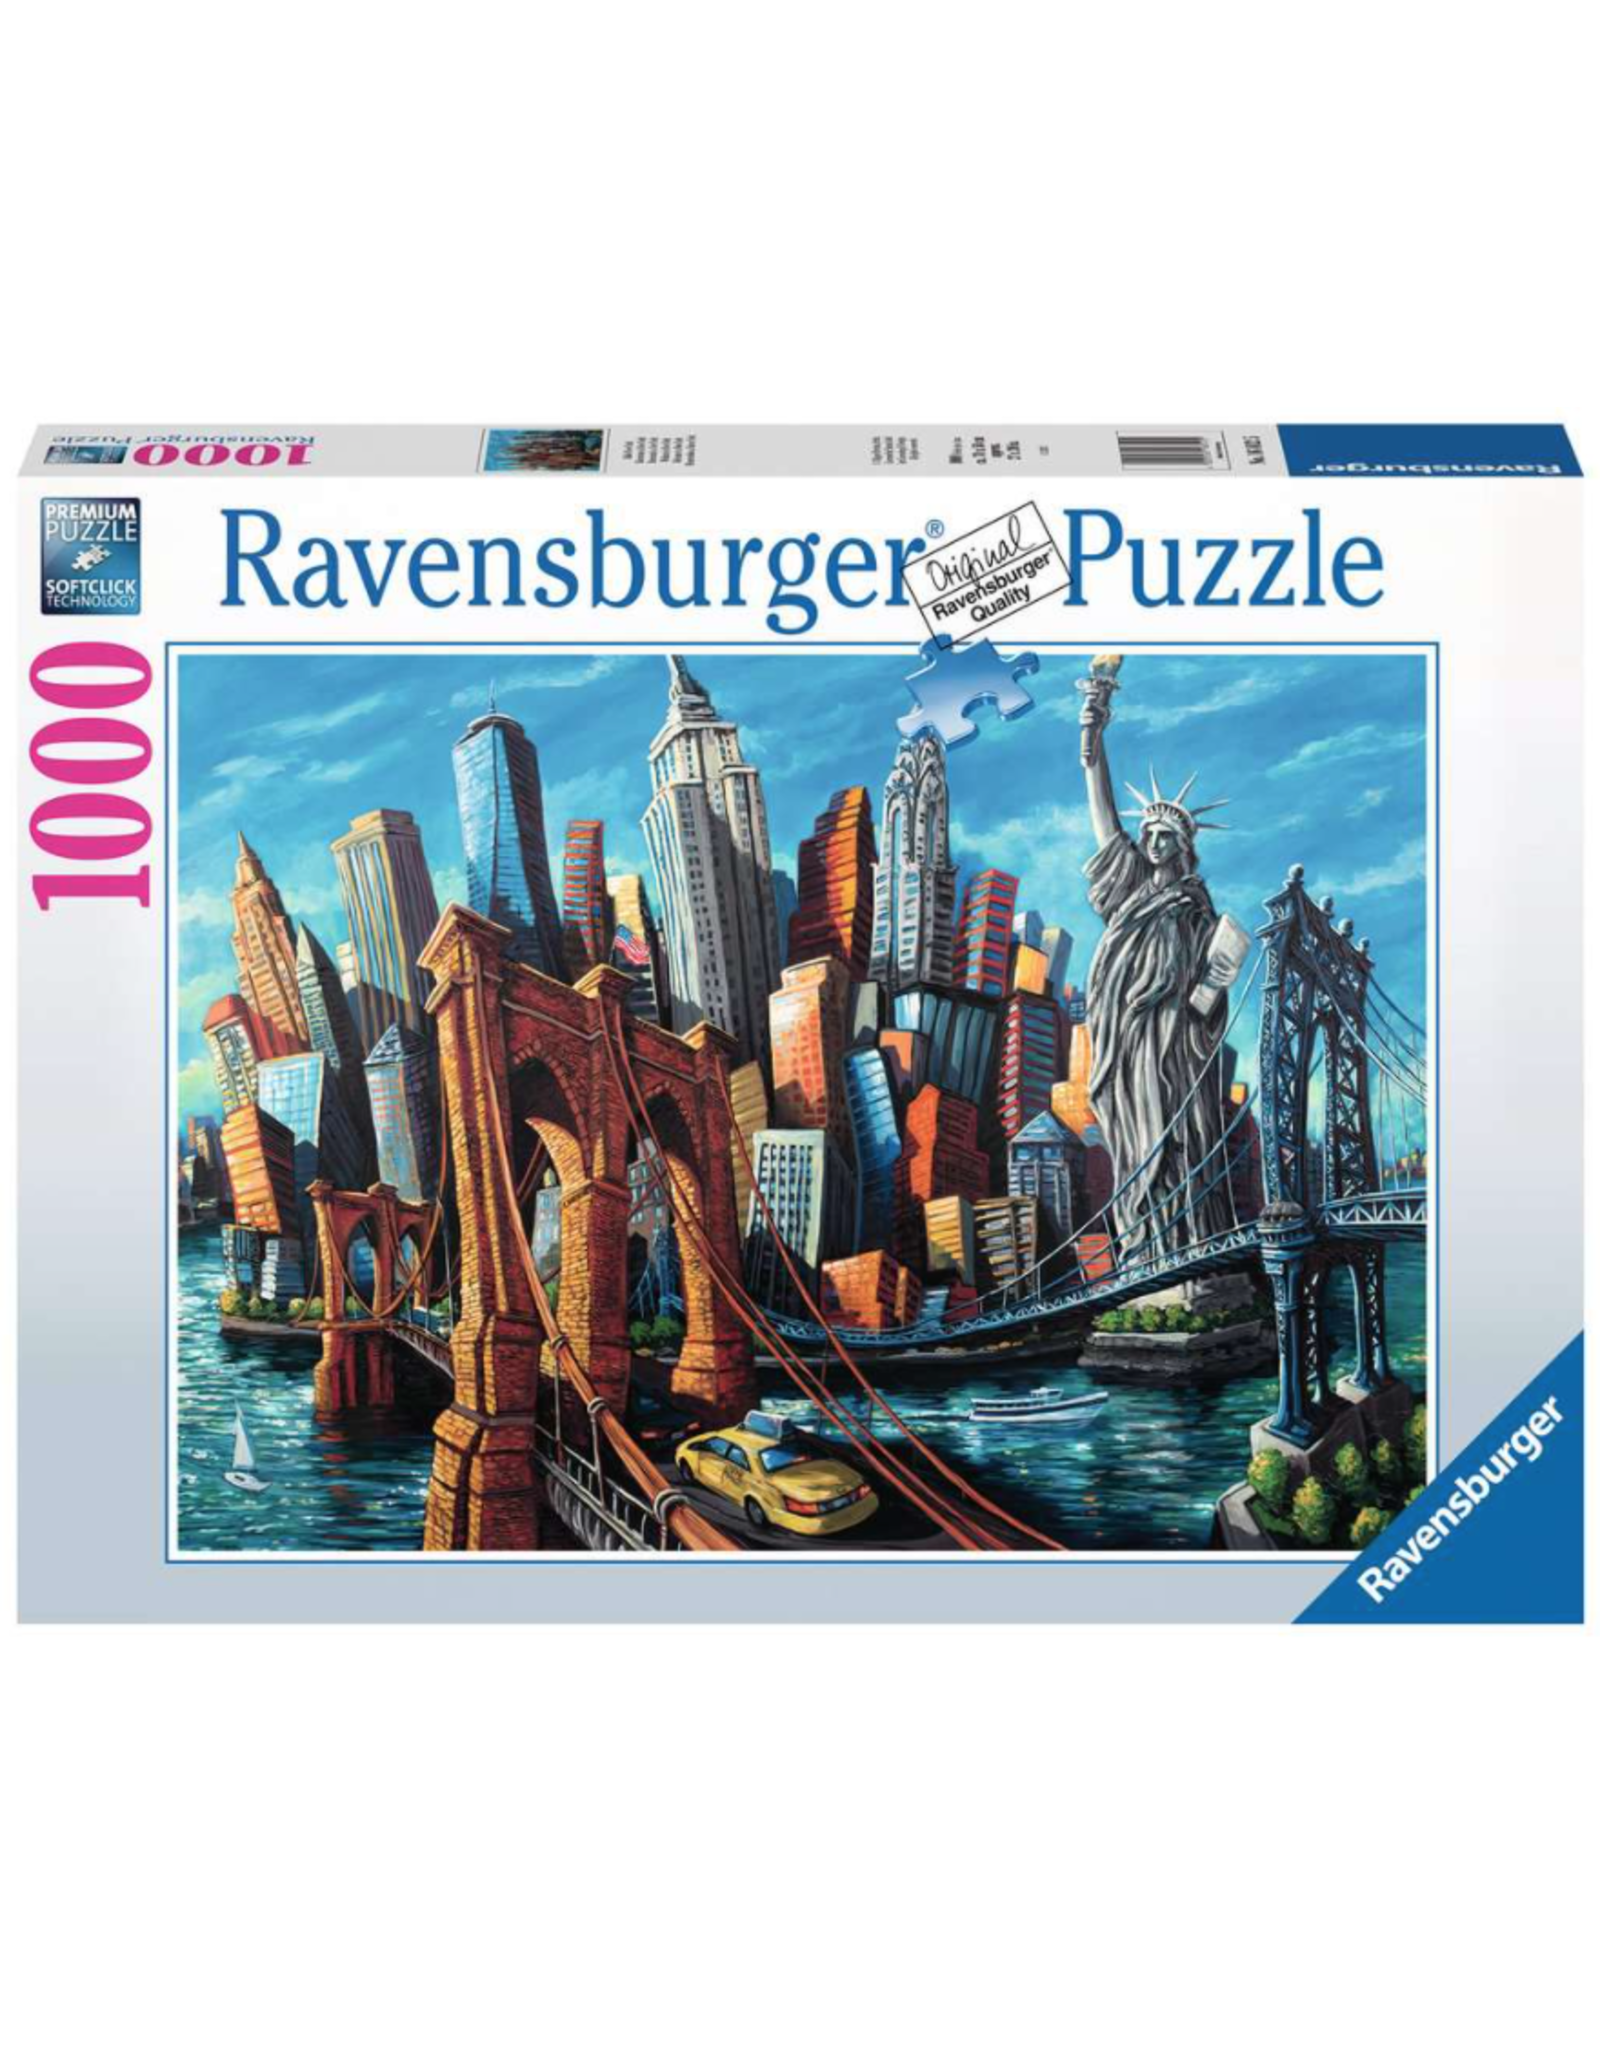 Ravensburger 1000 pcs. Welcome to New York Puzzle